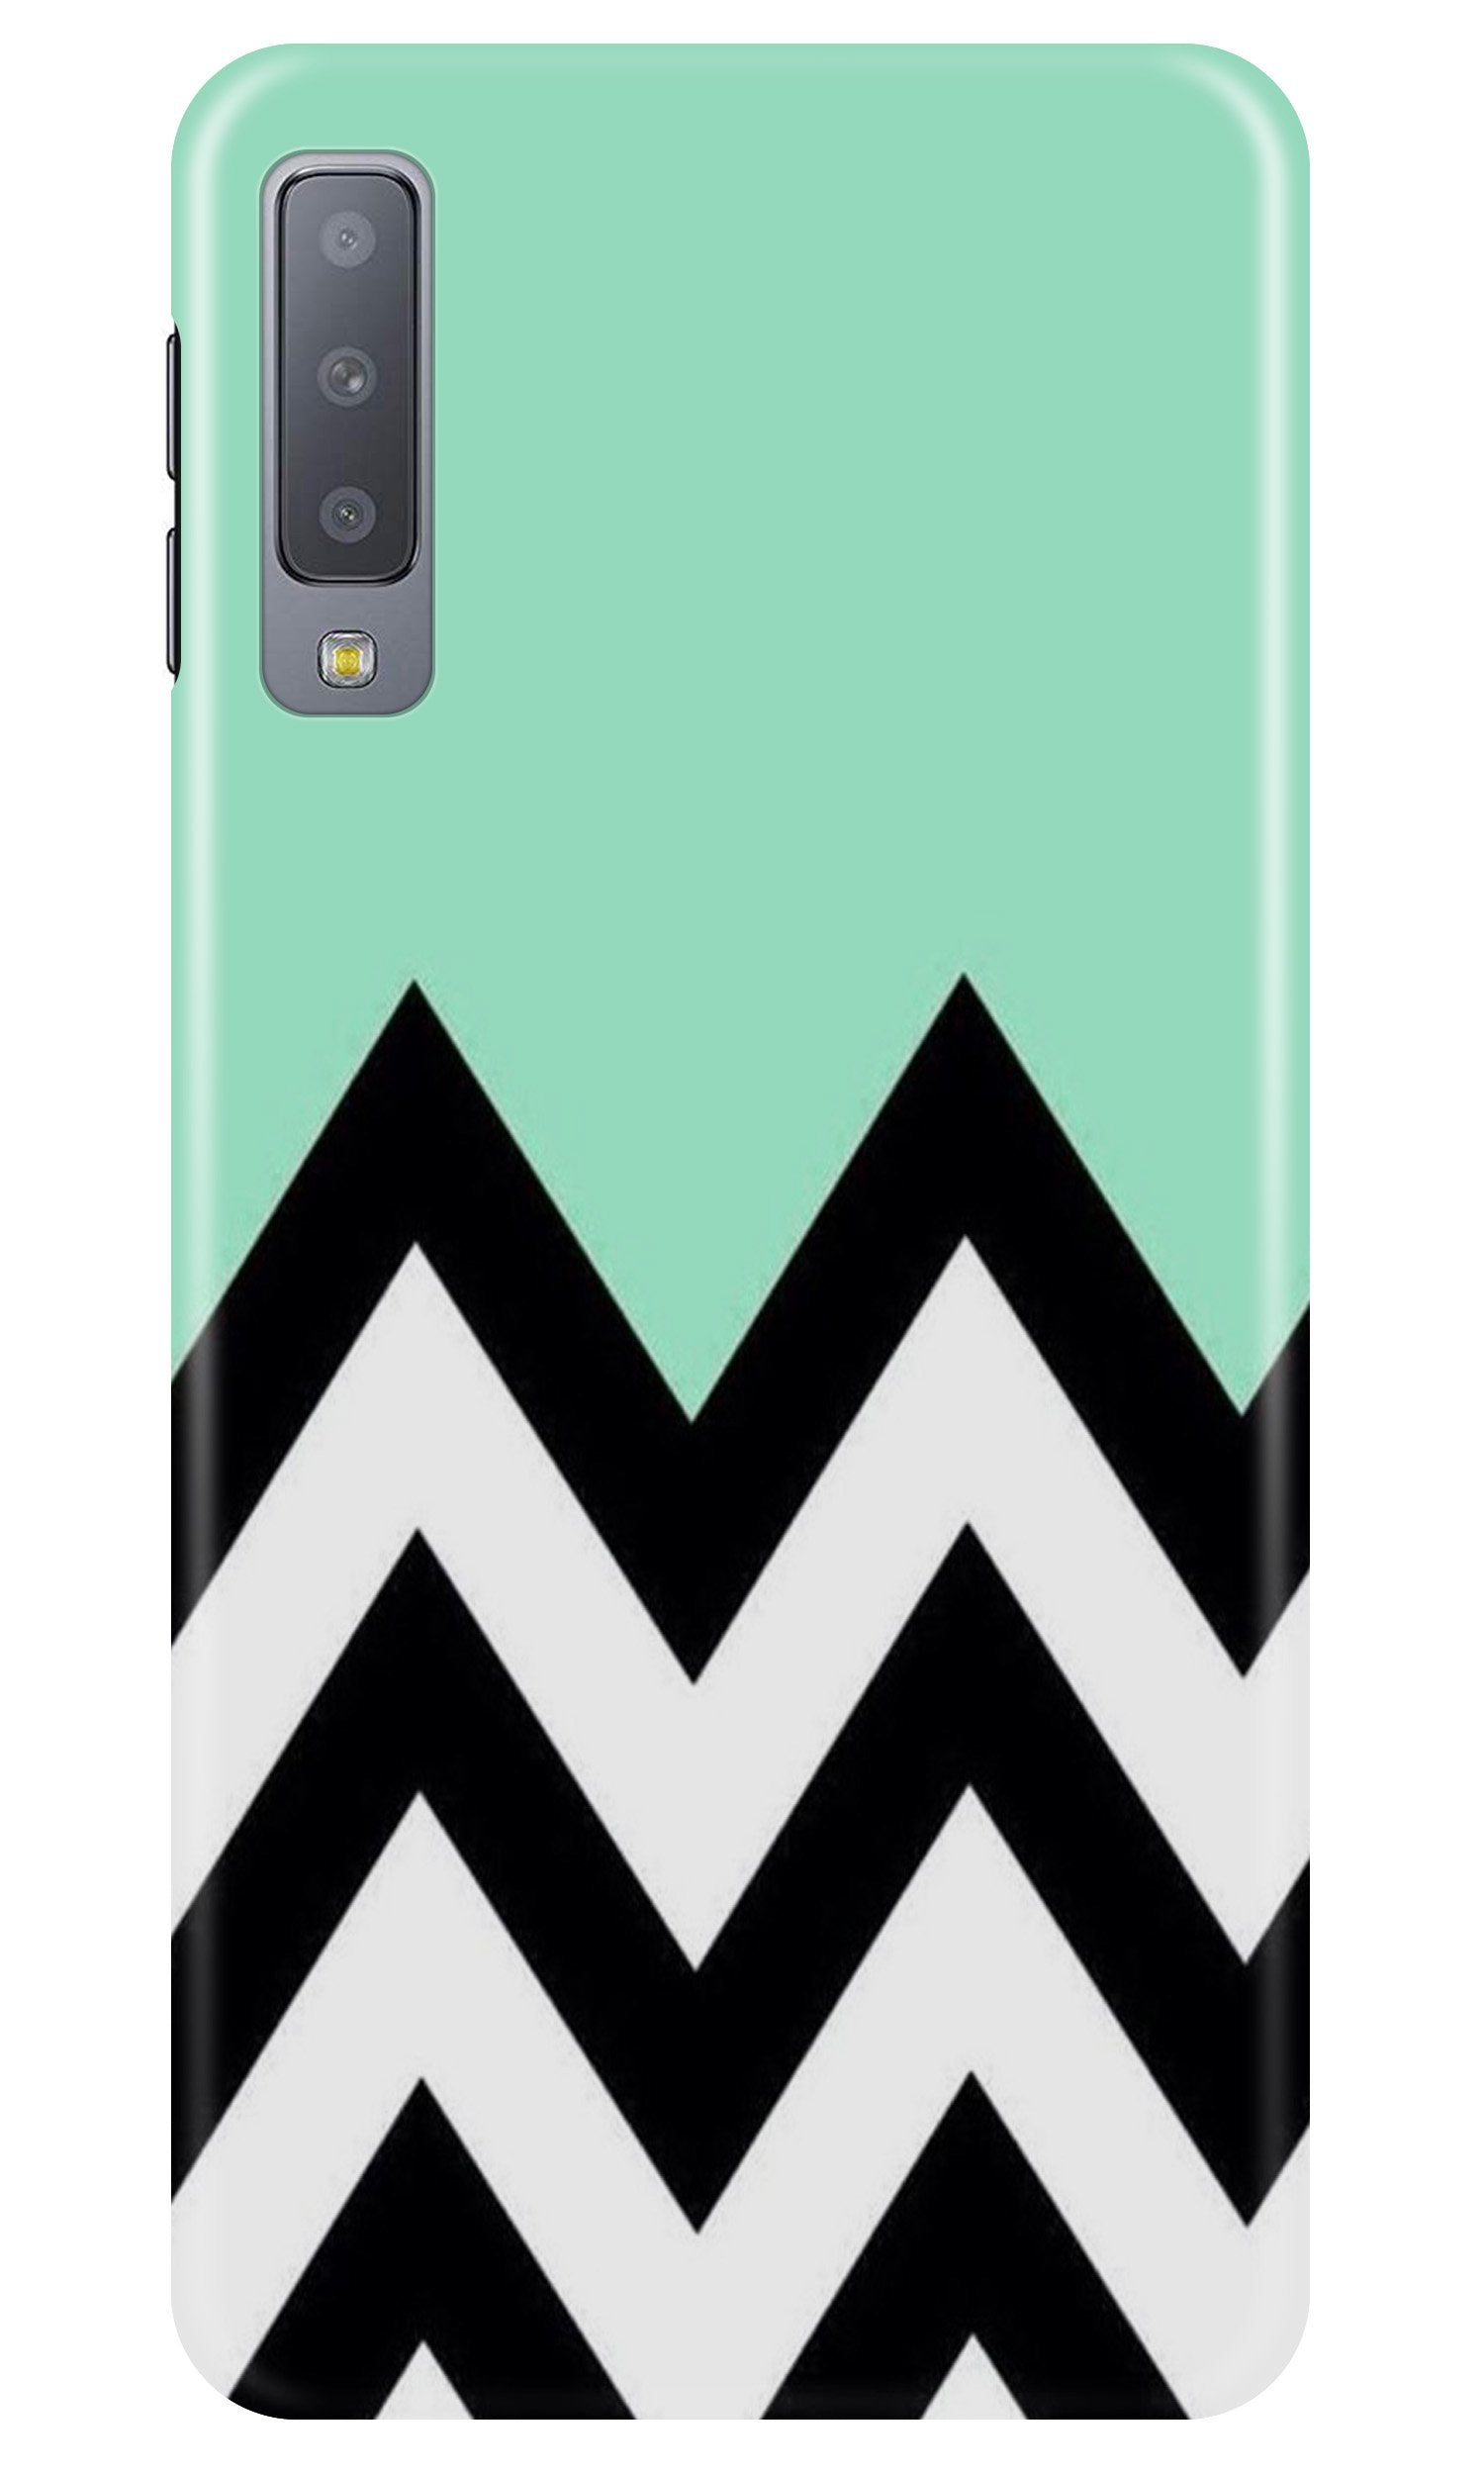 Pattern Case for Samung Galaxy A70s